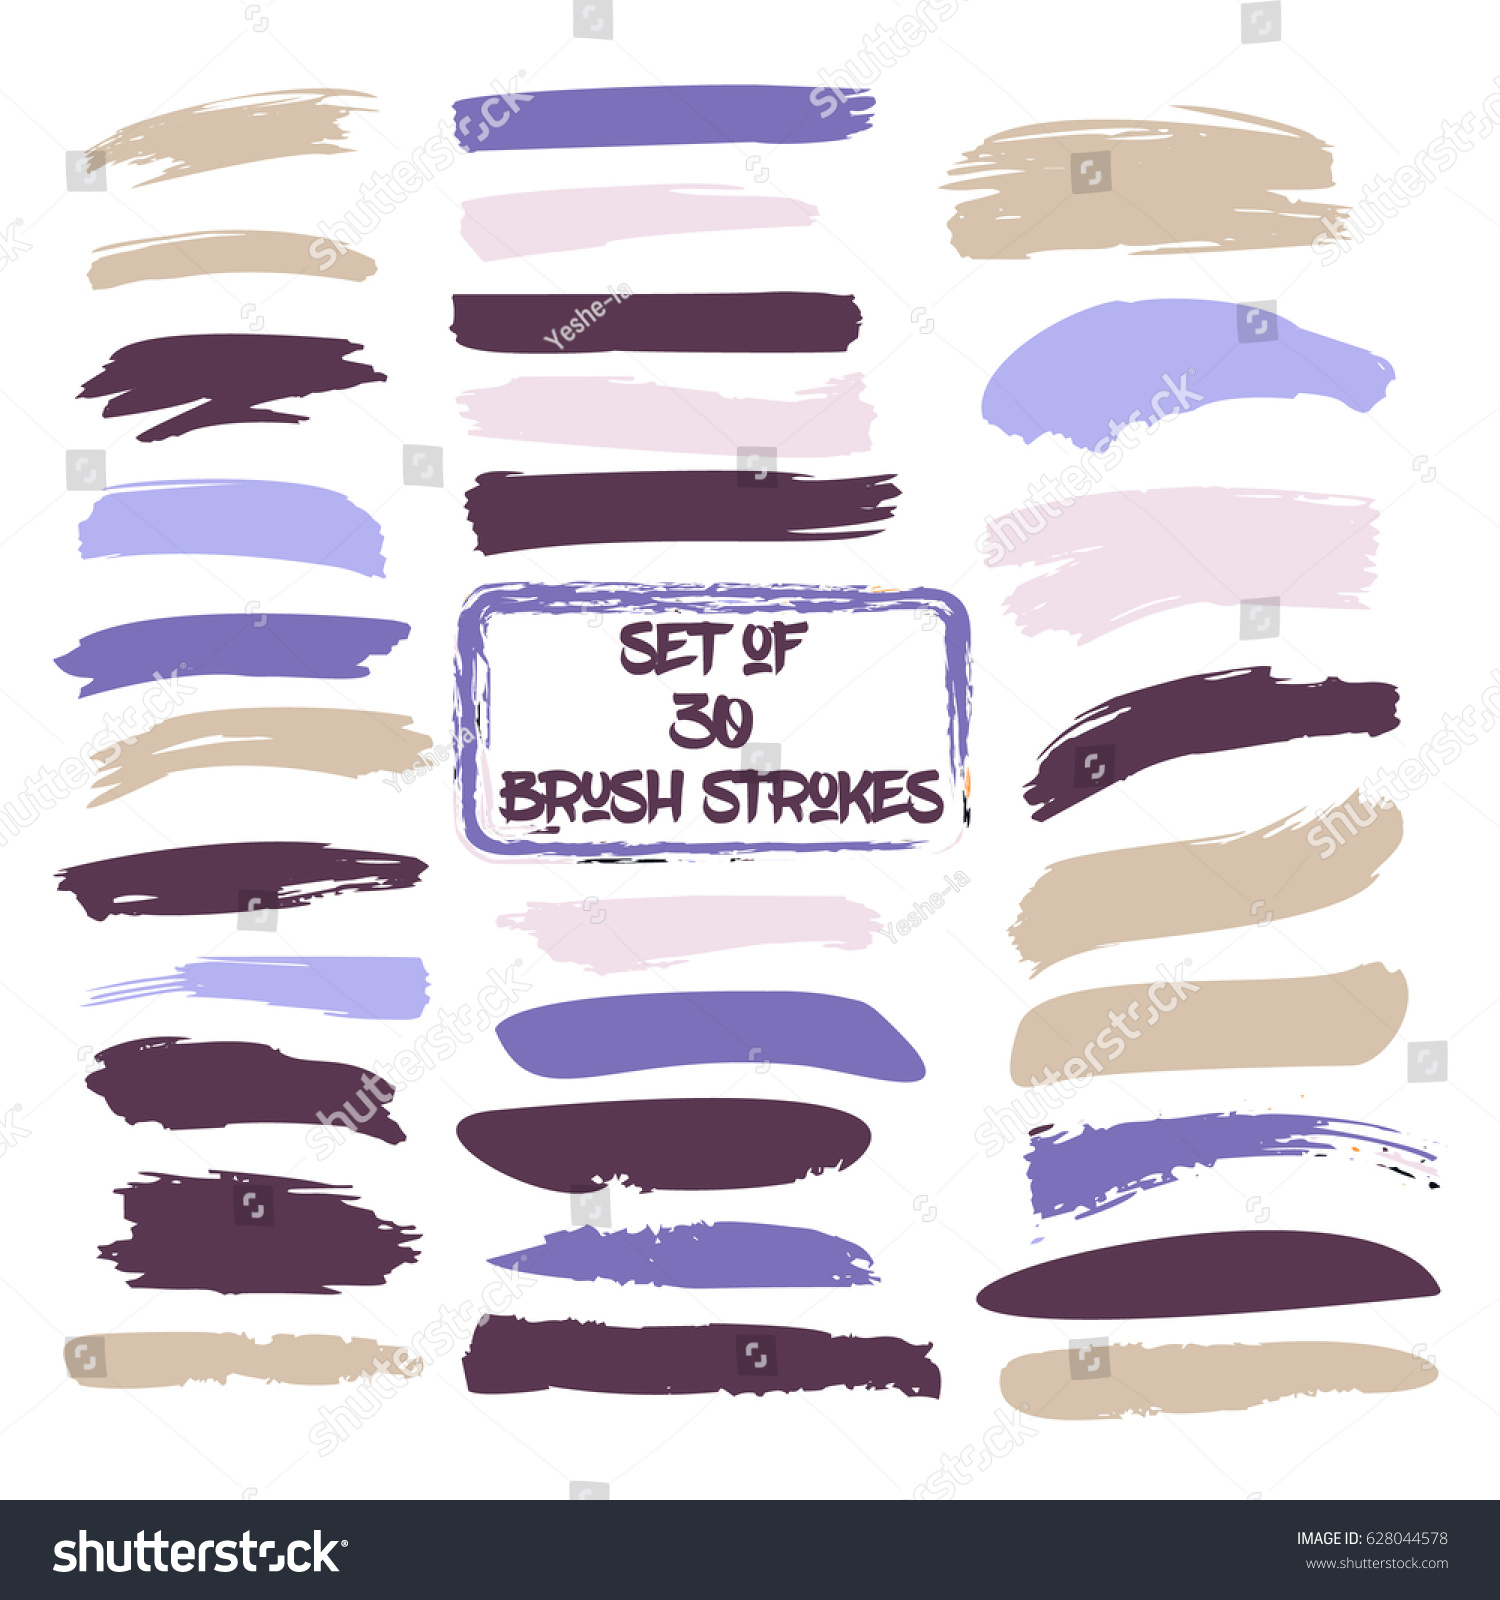 SVG of Set of thirty trendy purple and ochre vector brush strokes or backgrounds. Hand painted black ink brush strokes, brushes, and lines. Dirty grunge artistic design elements.  svg